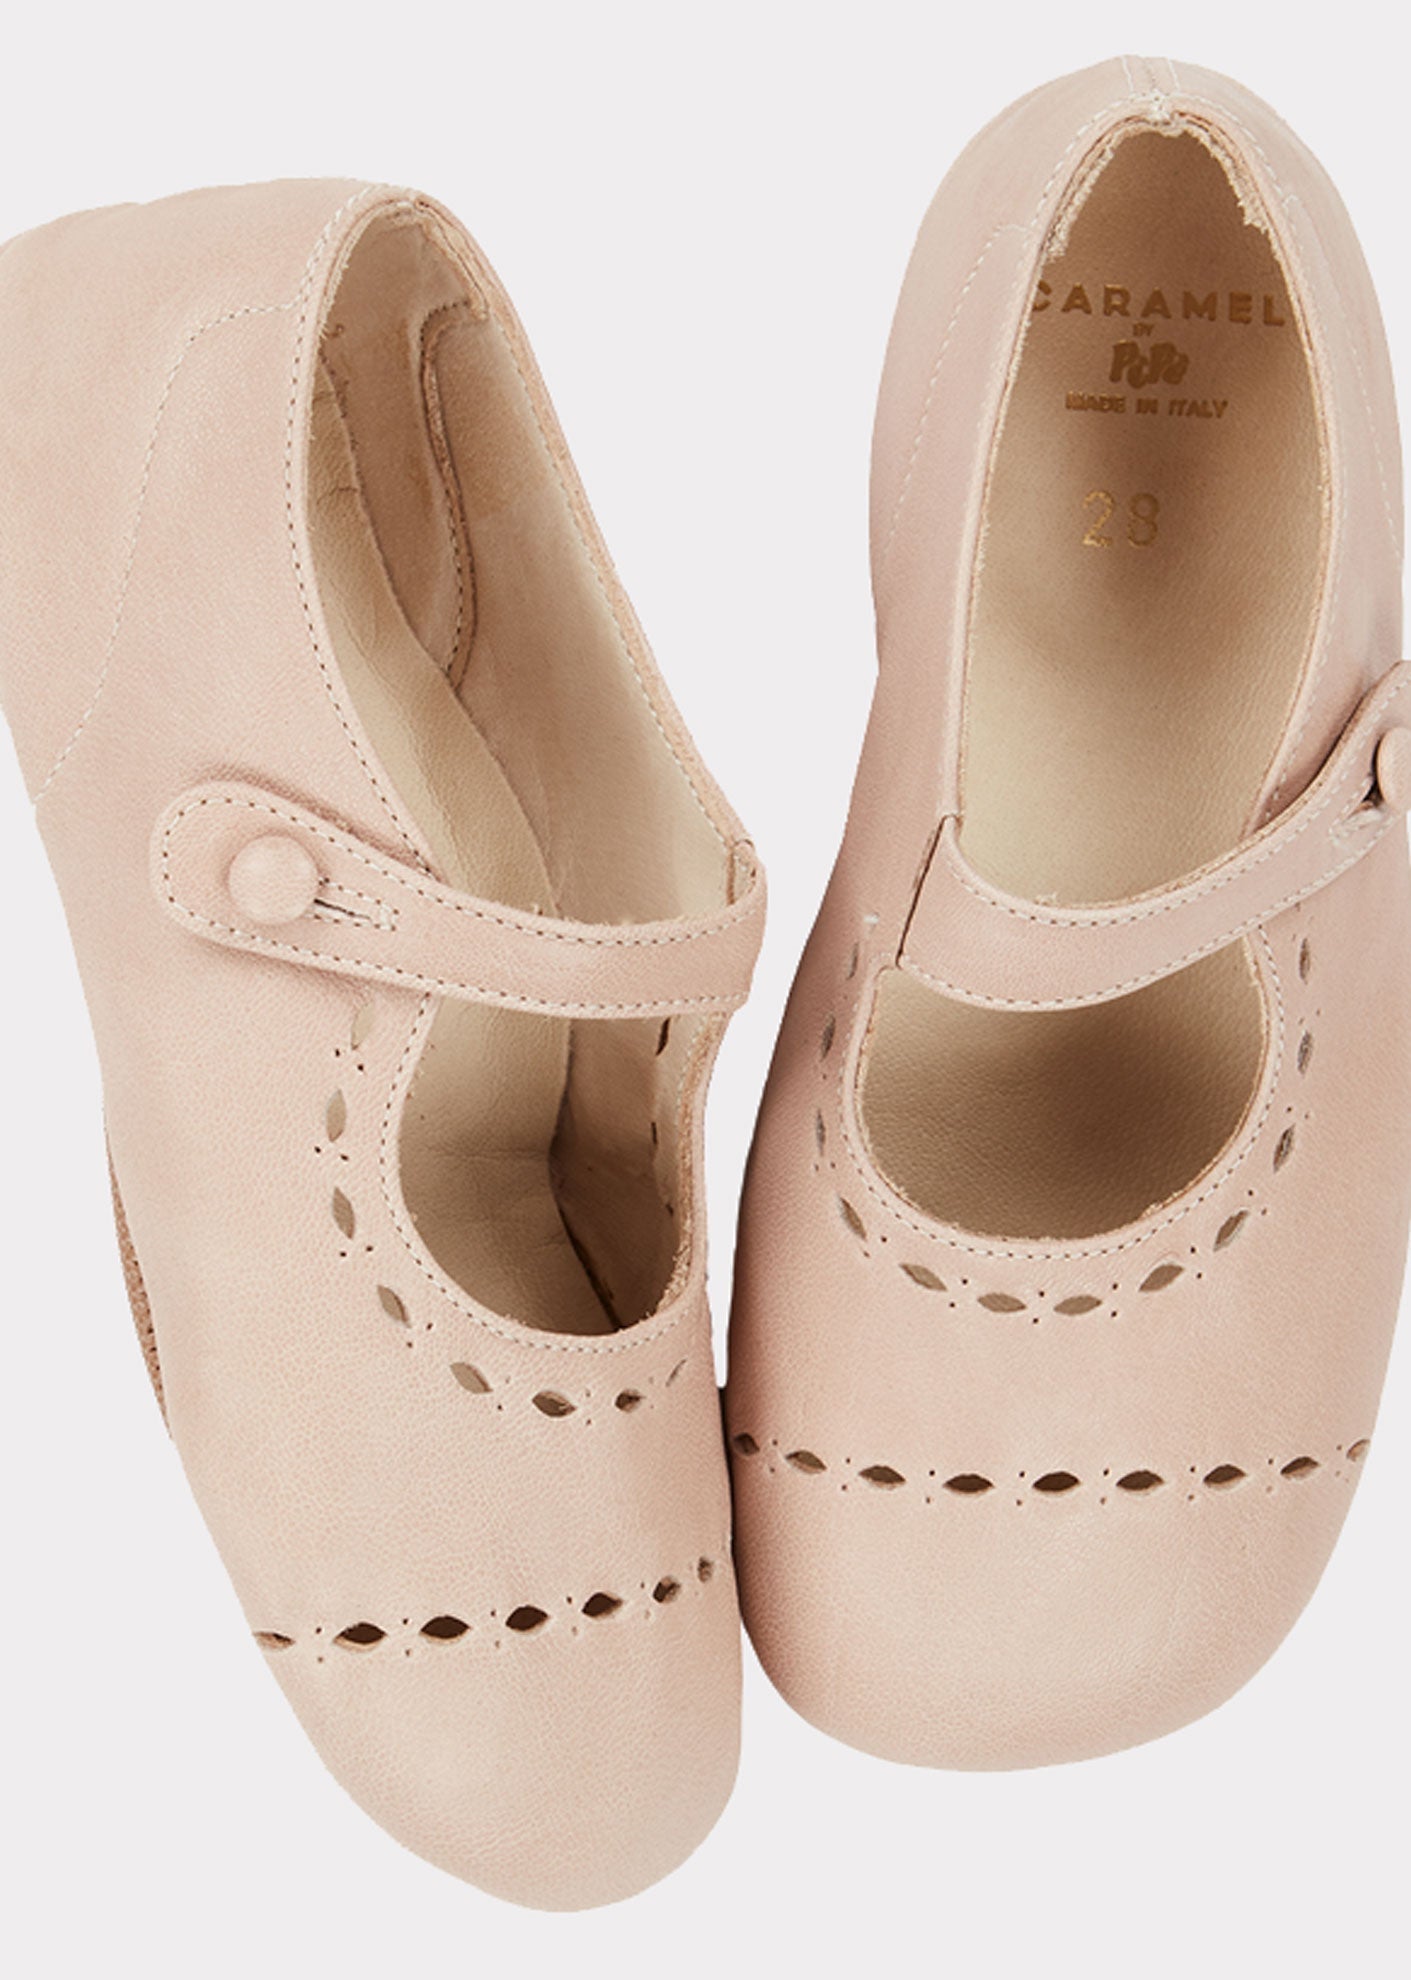 NEVADA BALLET SHOES - PALE PINK